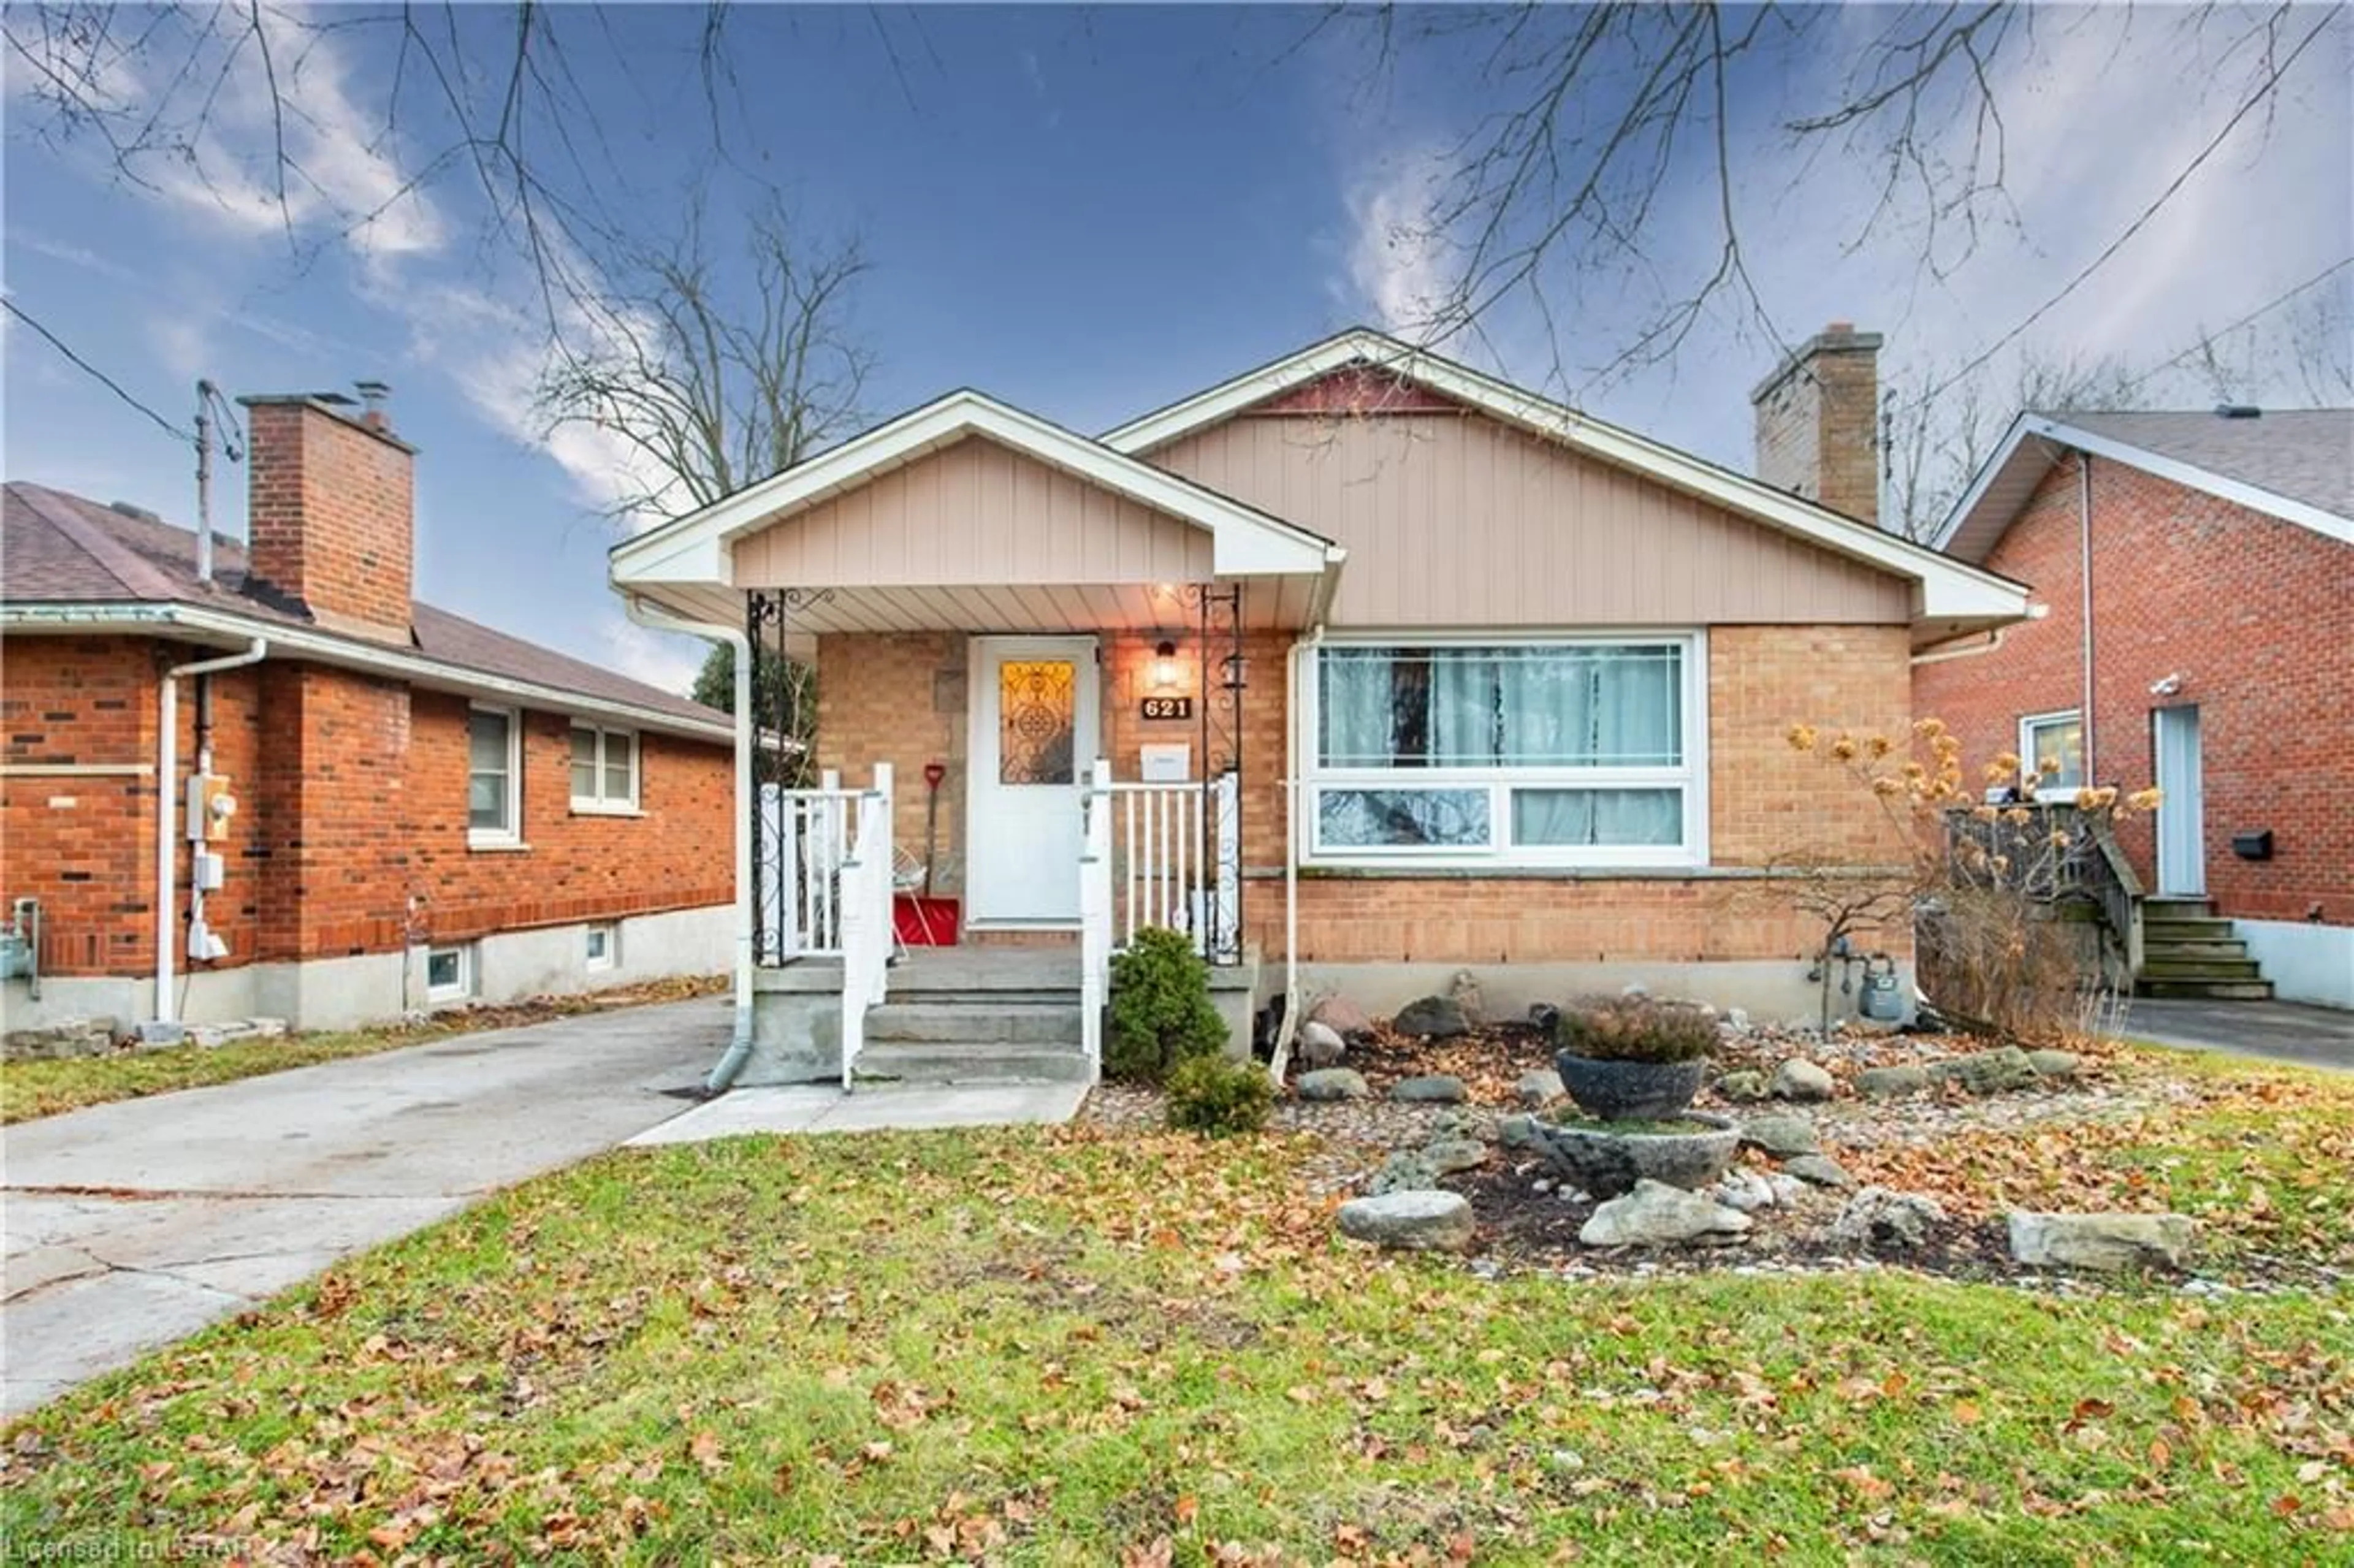 Home with brick exterior material for 621 Ross St, London Ontario N5Y 3V8